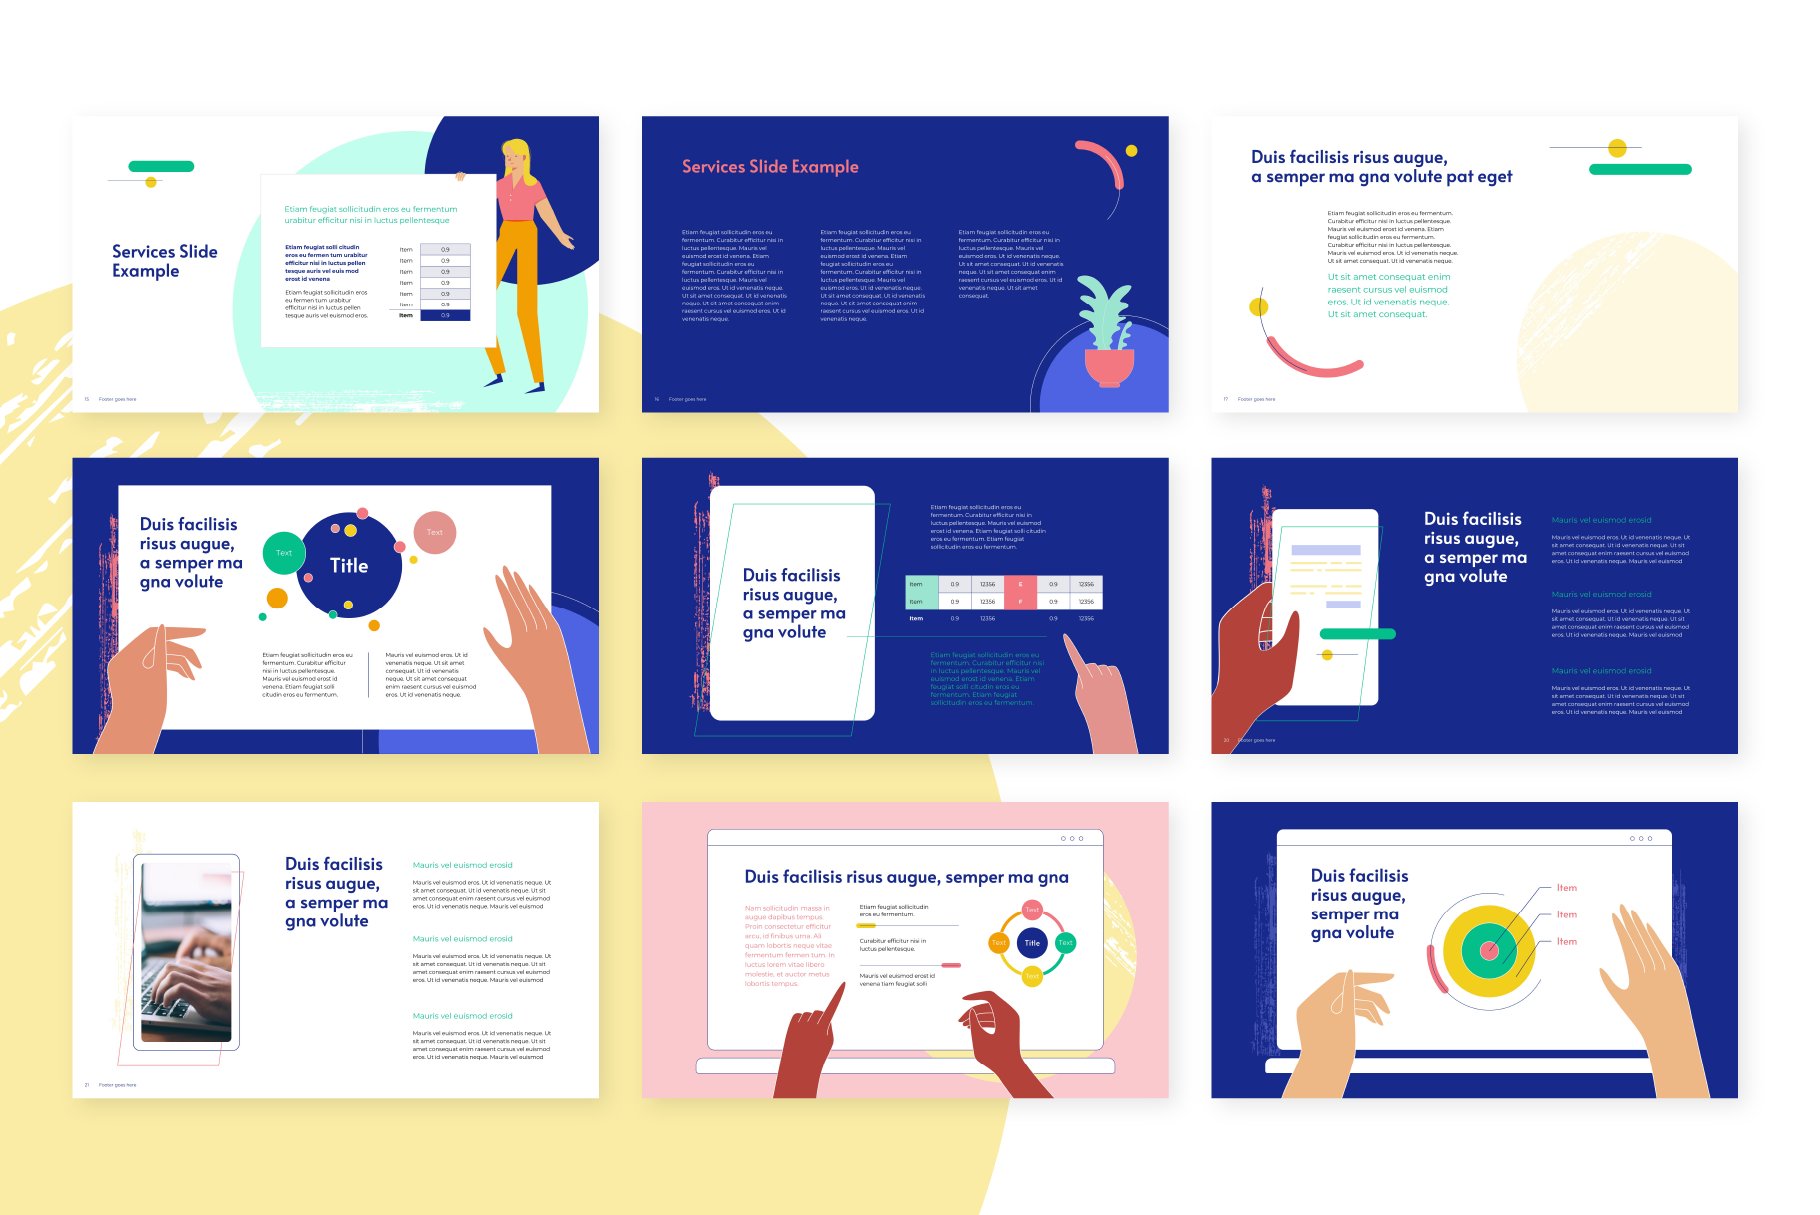 Colorful slides with blue sections and cool graphics.